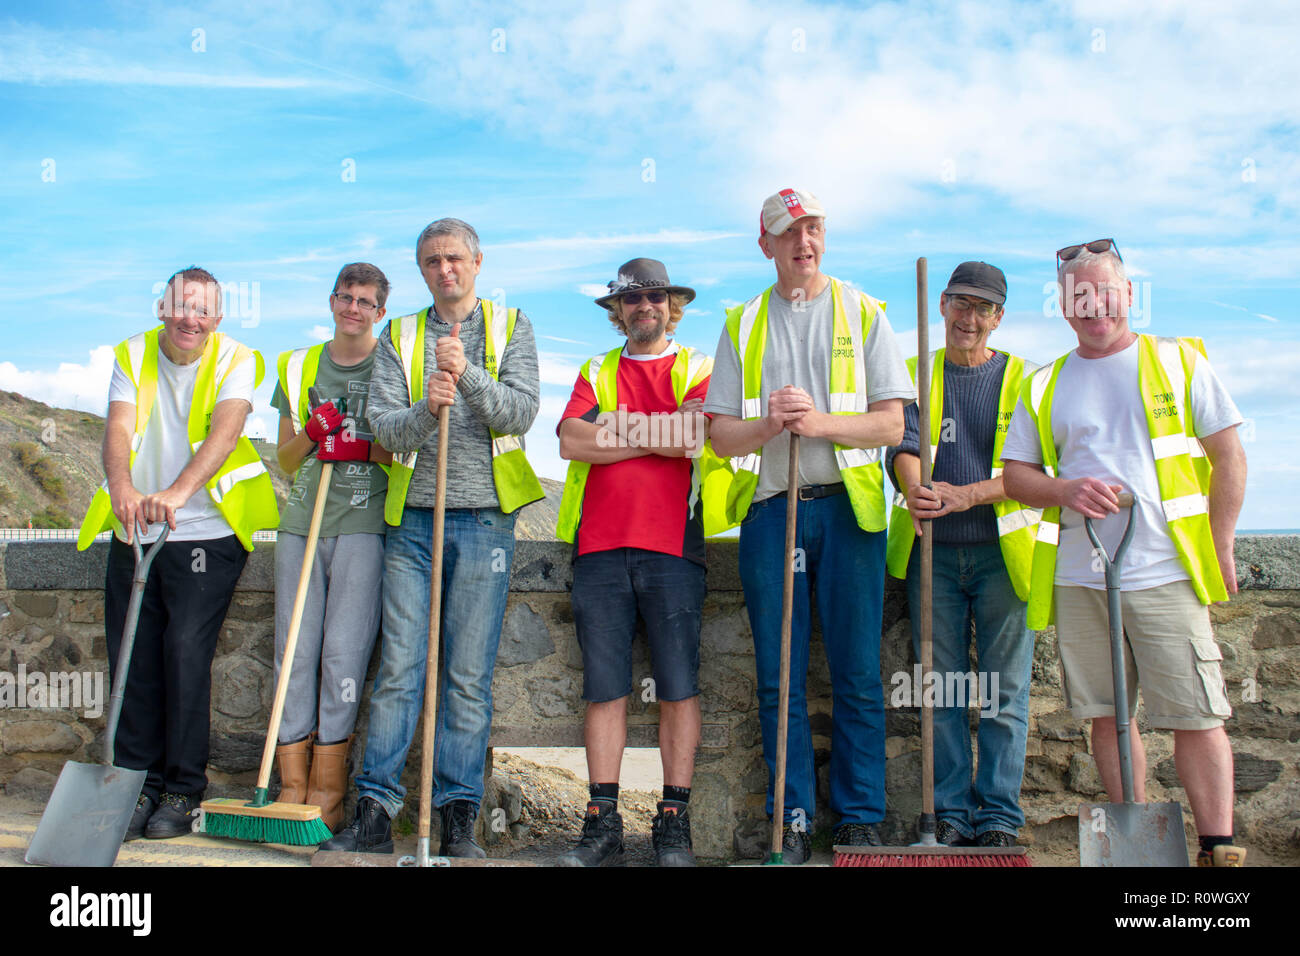 The Folkestone Town Sprucer Group Photo. They give up there time to keep folkestone looking clean and tidy for everyone. This them after days work. Stock Photo